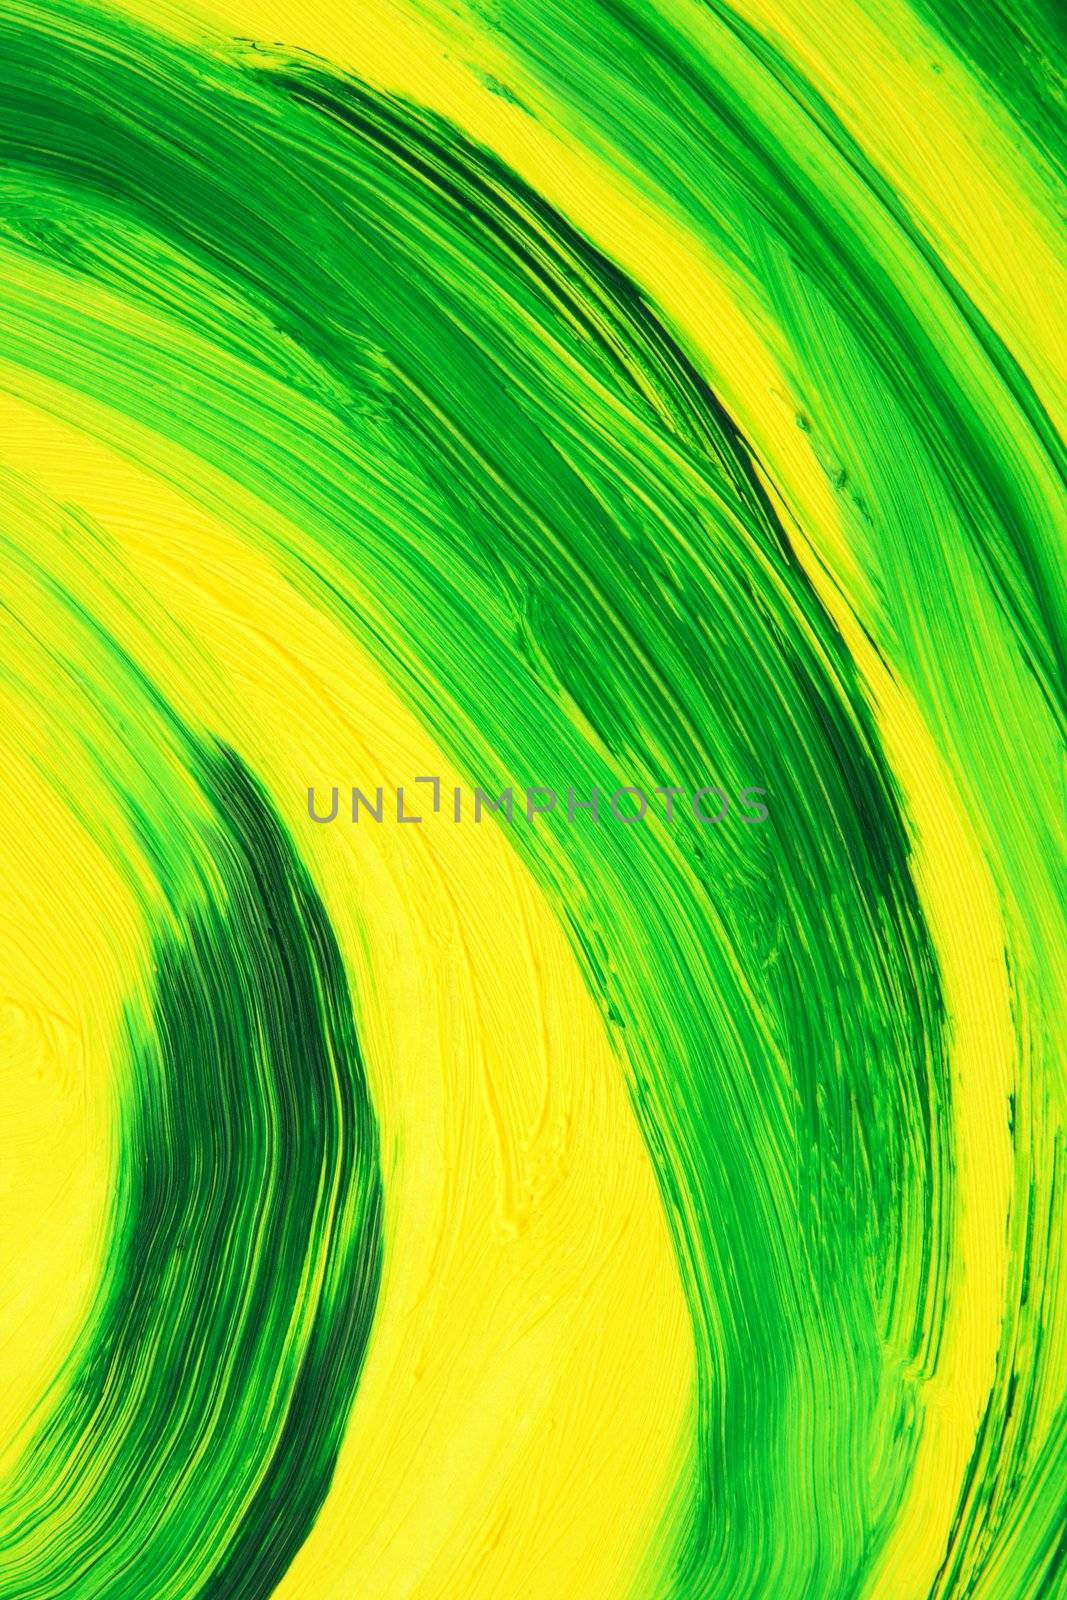 Green and yellow oil-painted abstract curves. Texture of brush strokes.